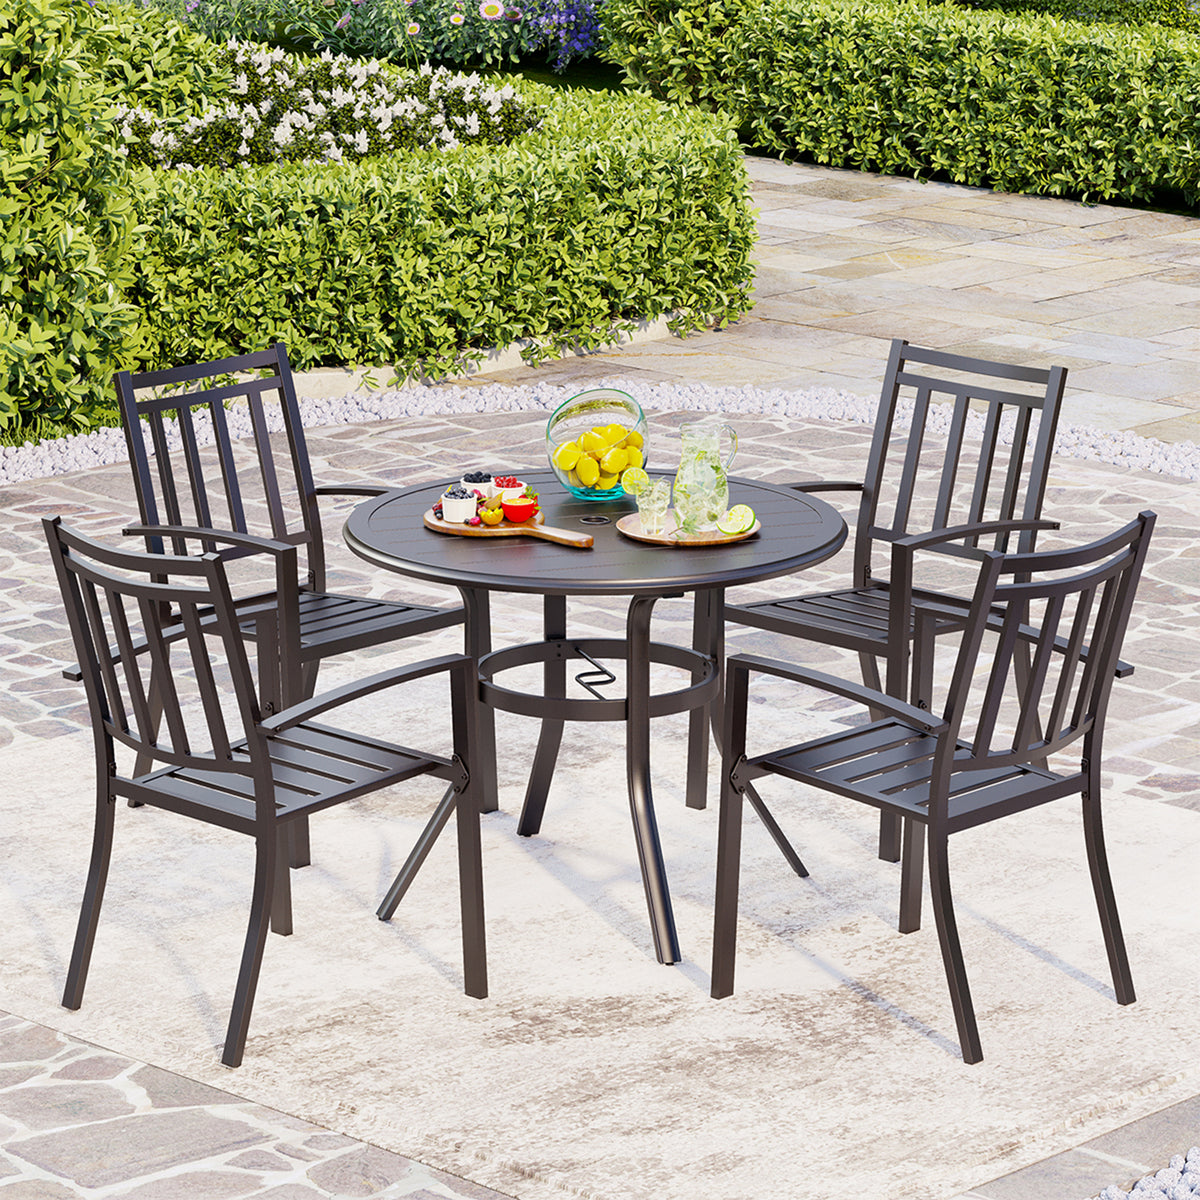 PHI VILLA 5-Piece Round Table & Stackable Chairs Outdoor Patio Dining Set